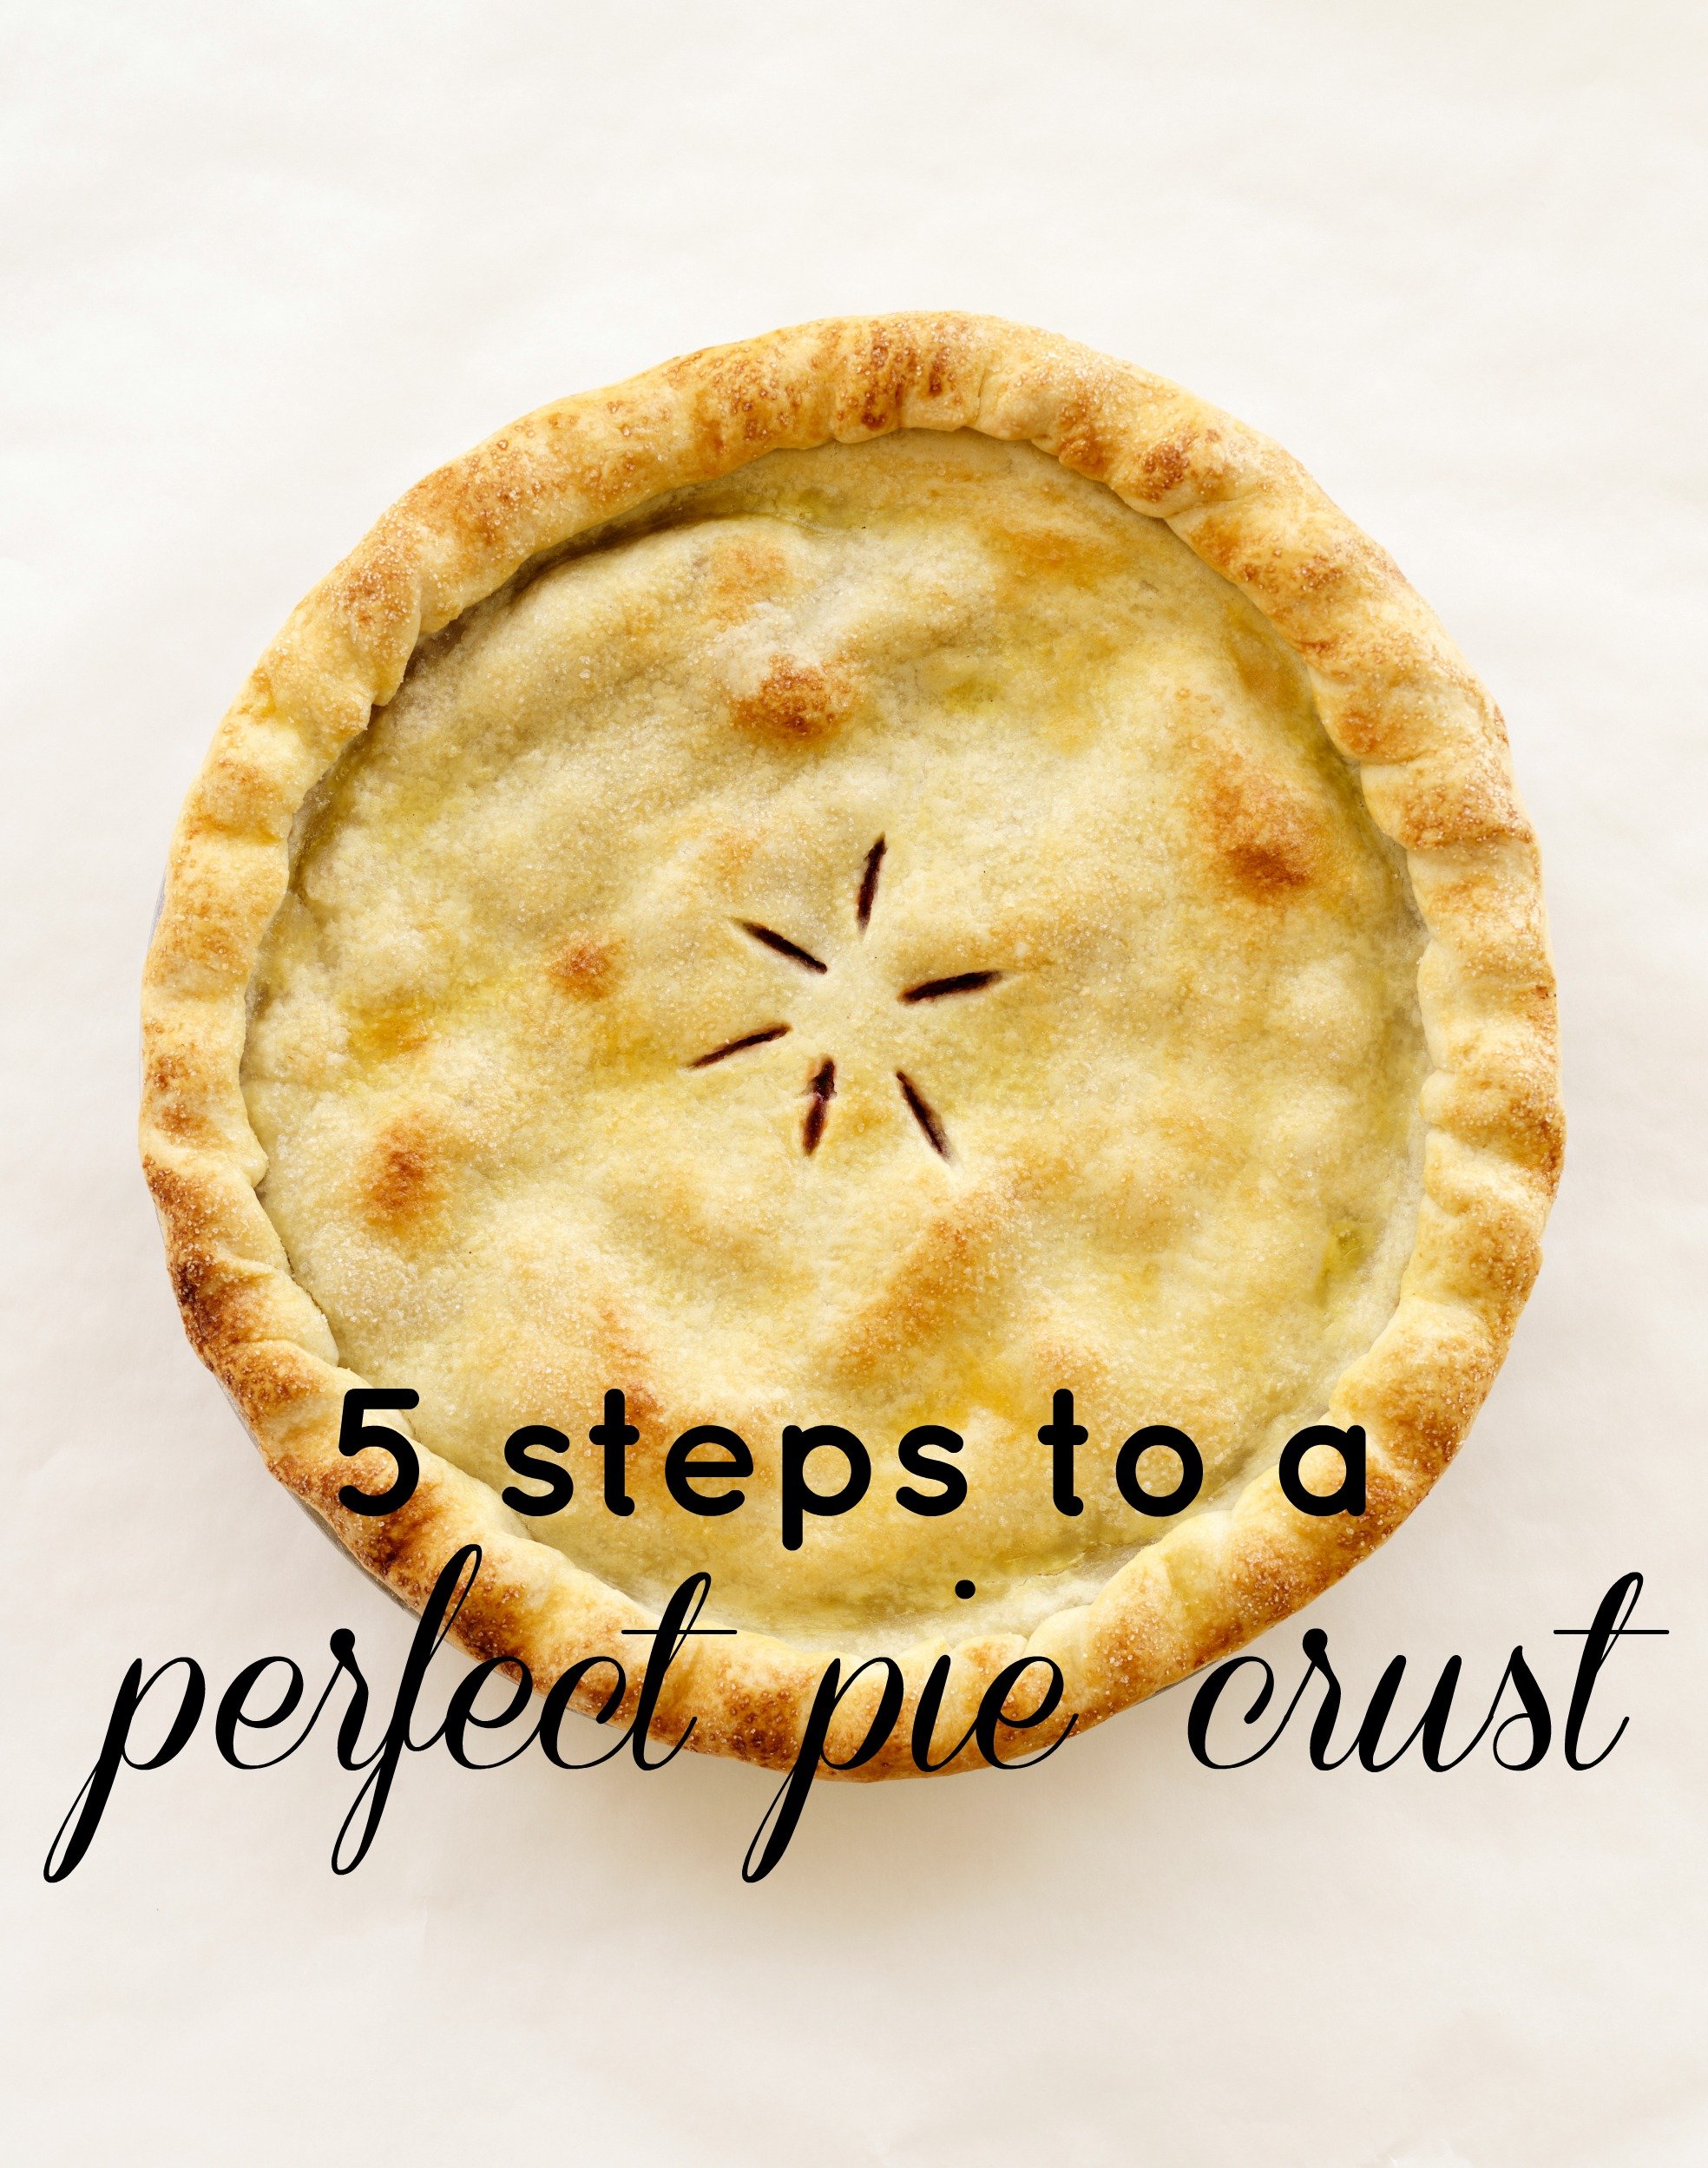 5 Steps to Perfect Pie Crust